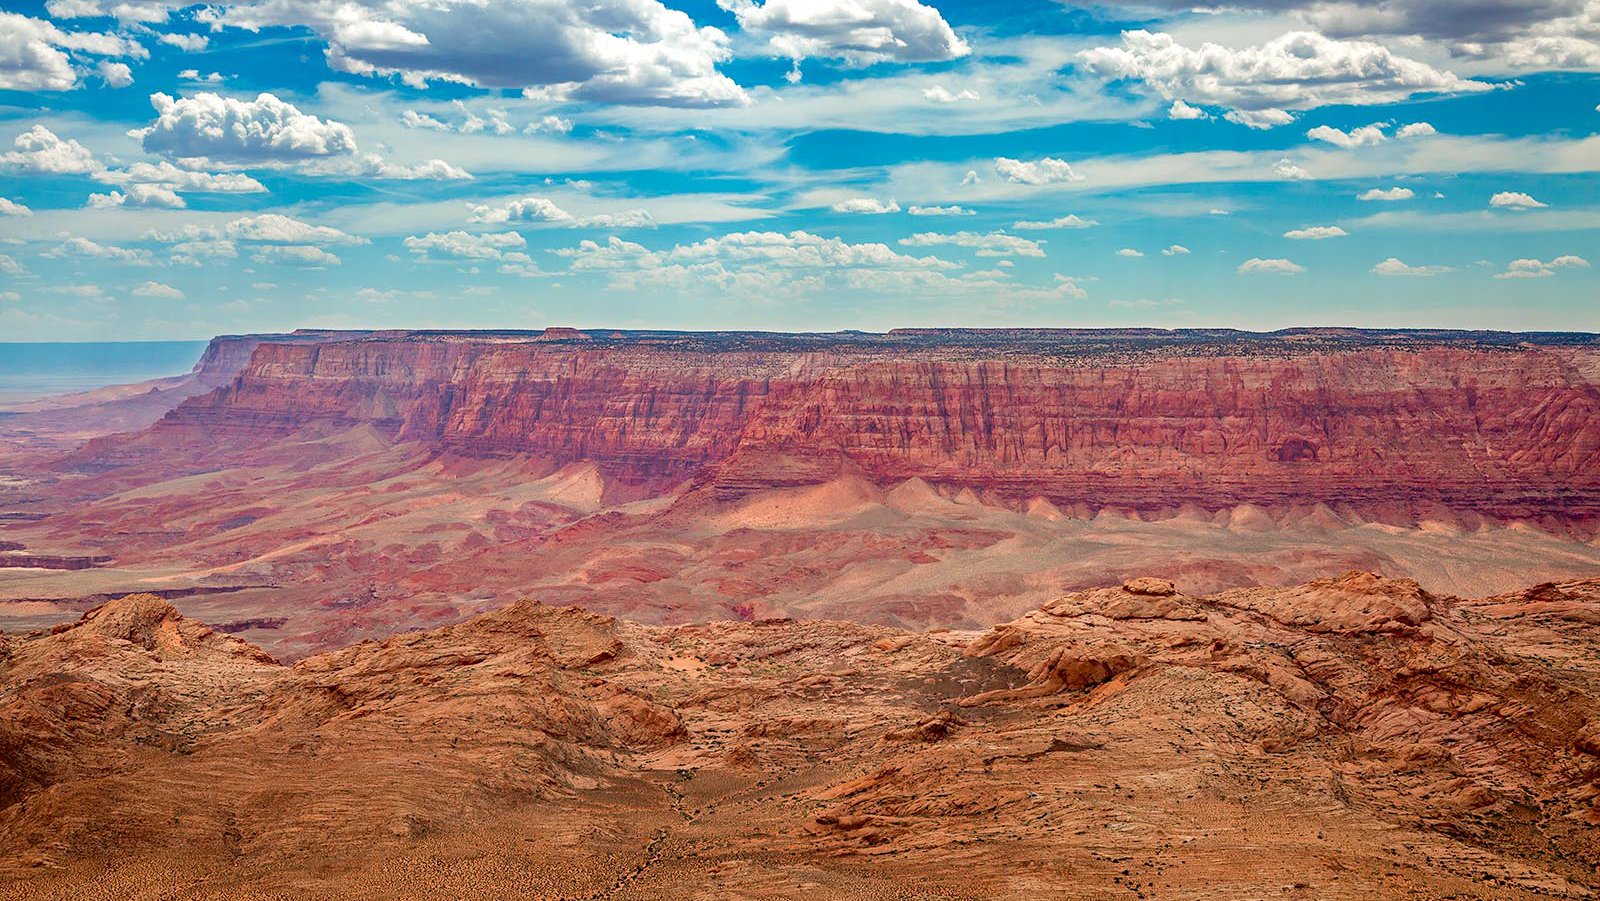 Blog photo of the Grand Canyon National Park with red rock contrasted against blue skies